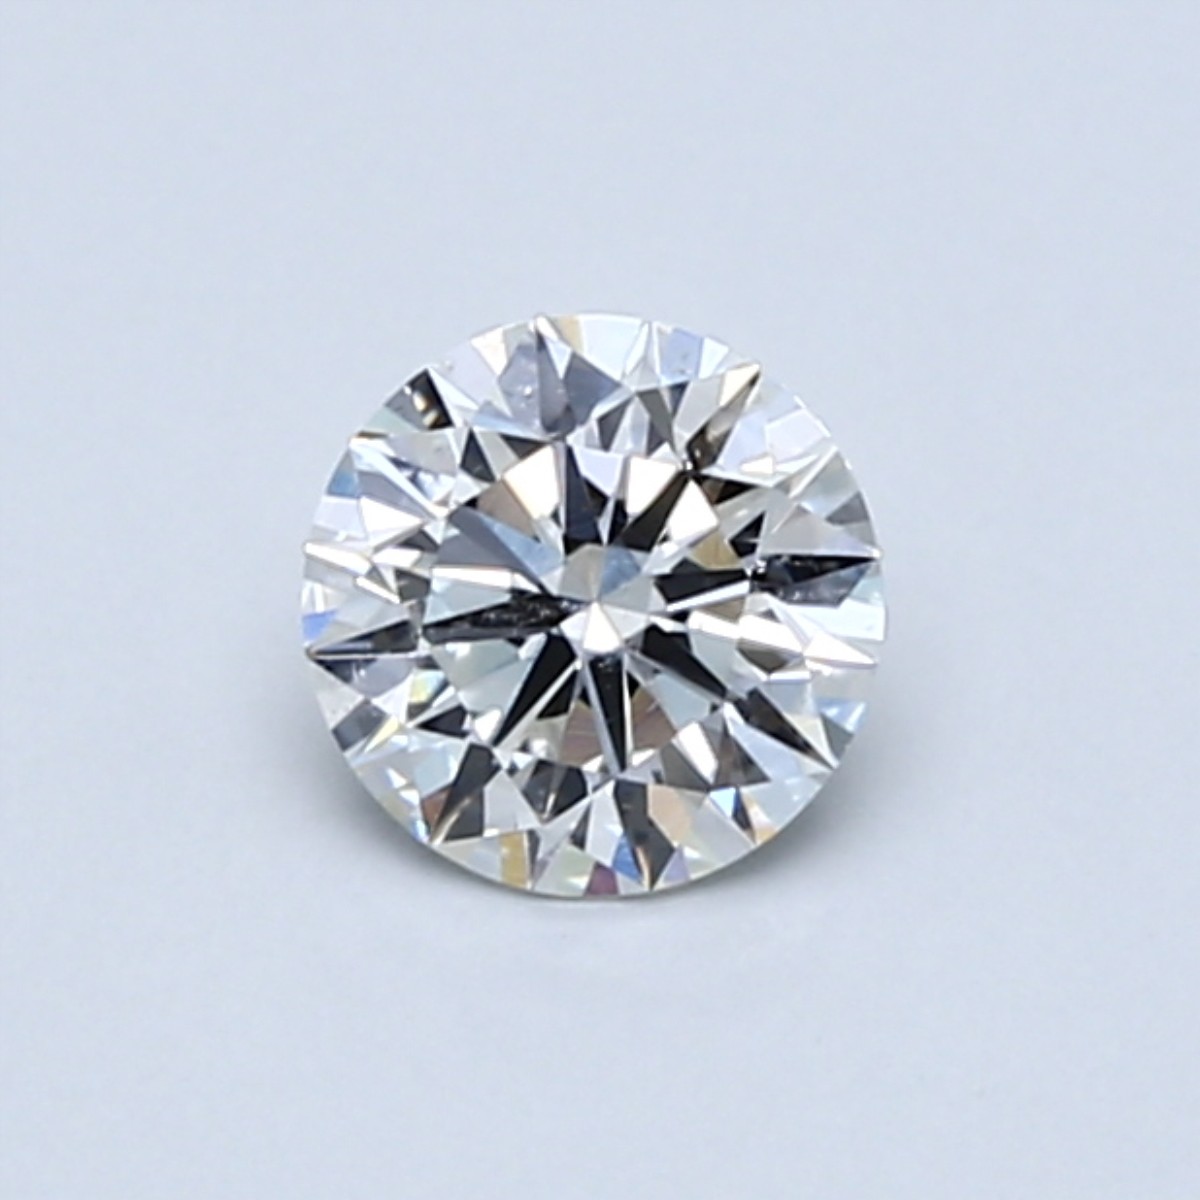 Round 0.53 Carat H Color SI1 Clarity For Sale